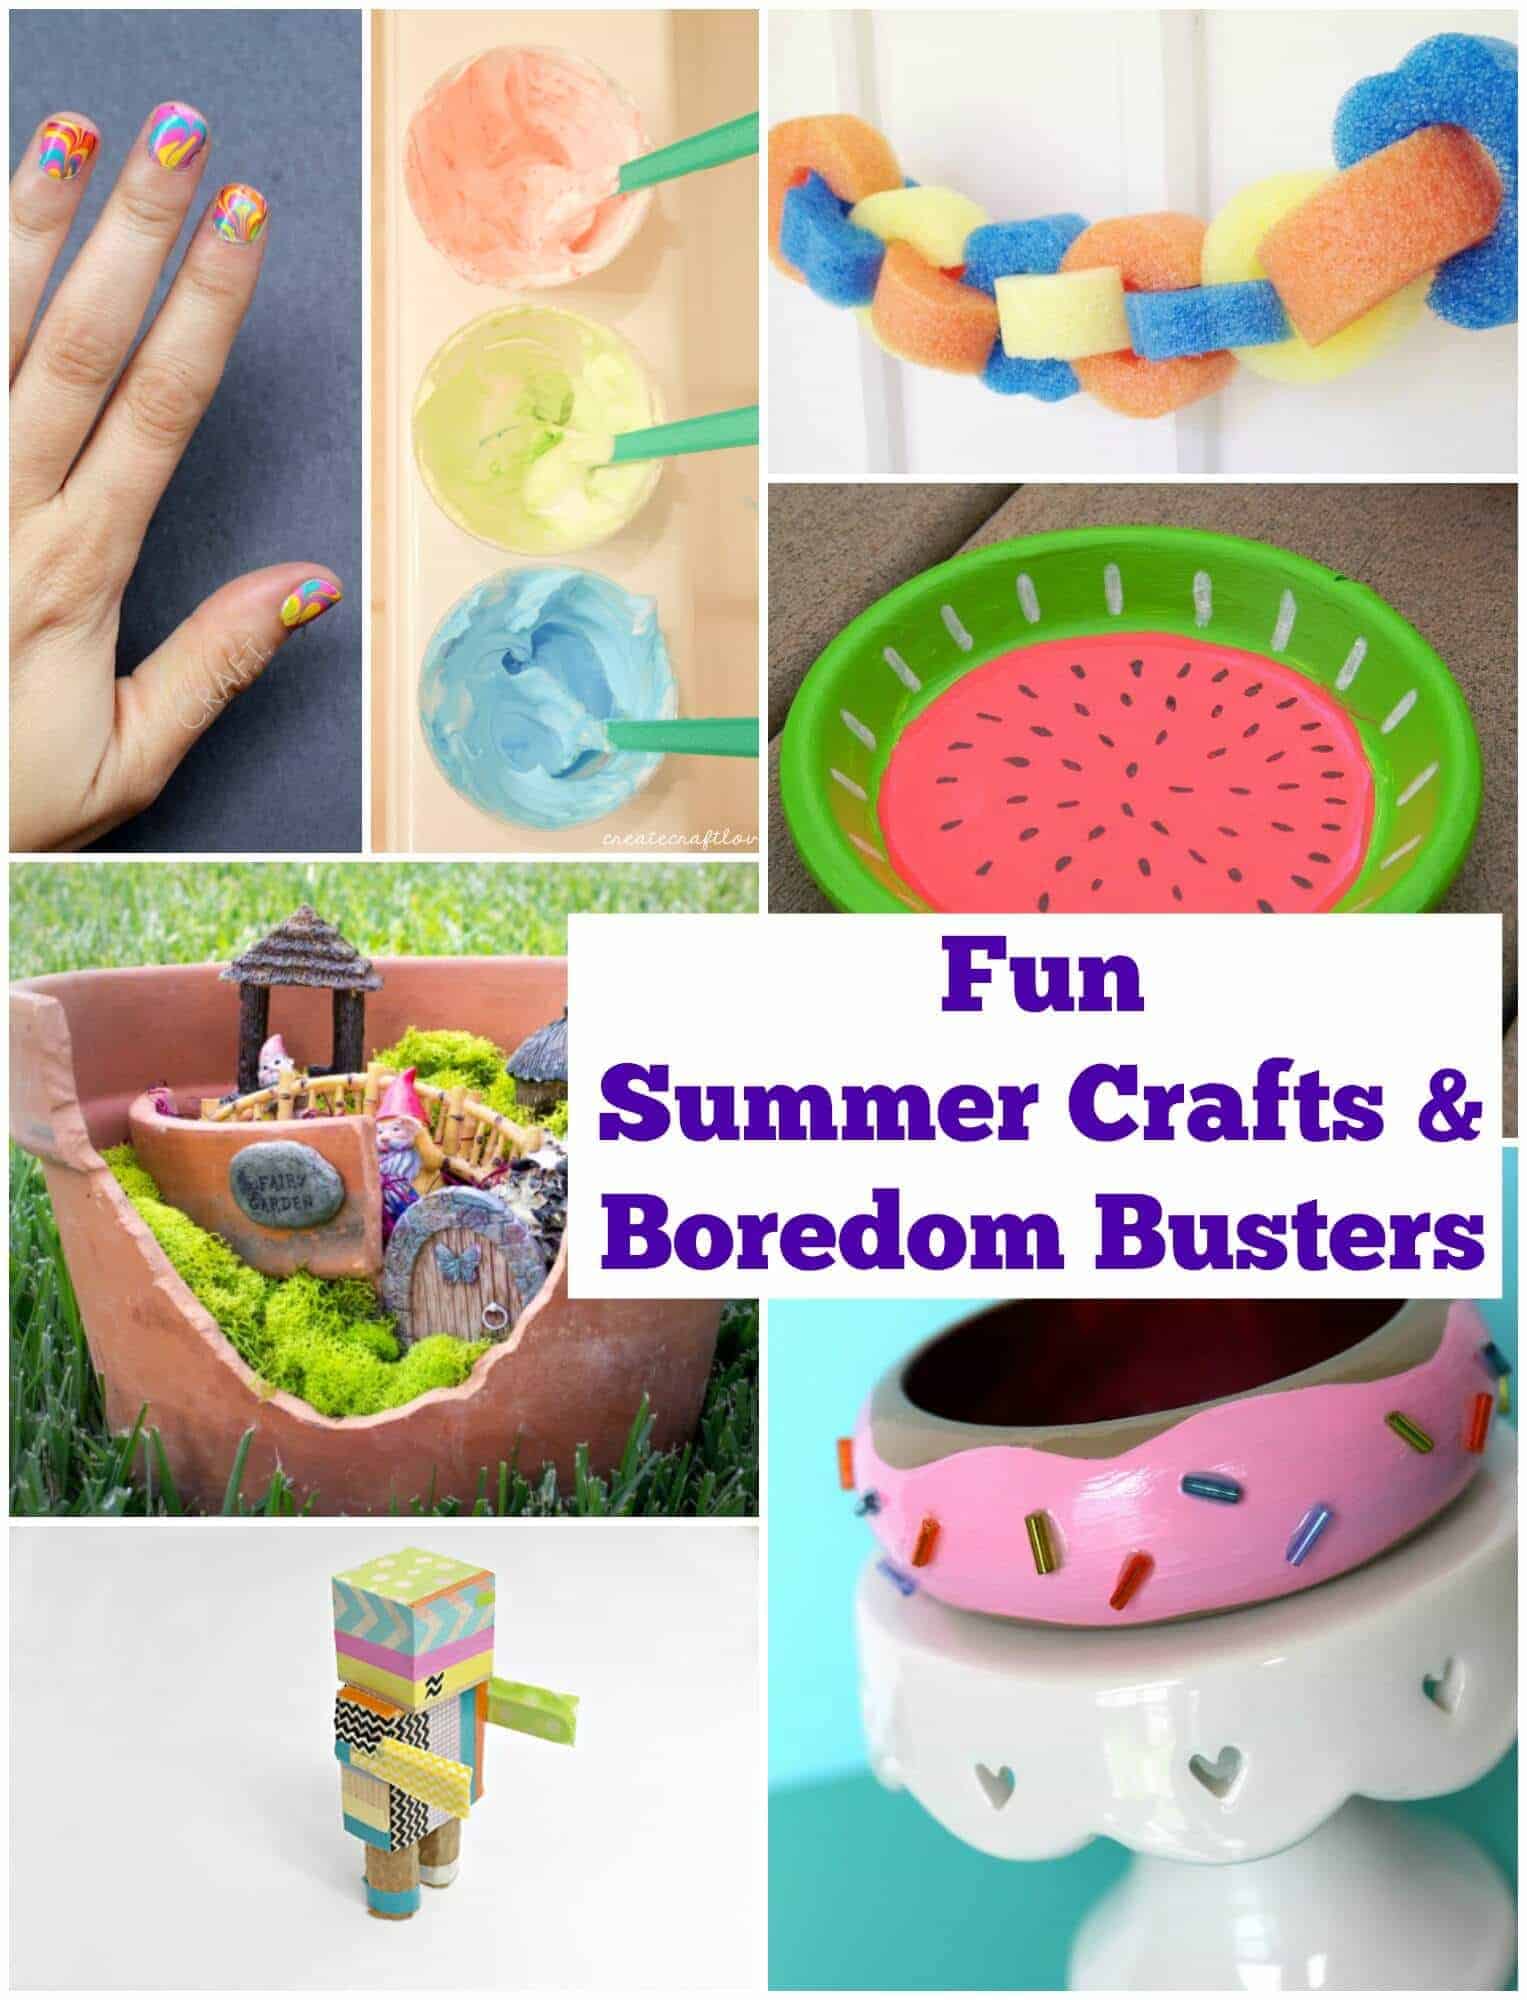 Fun Summer Craft Ideas for Kids - Page 2 of 2 - Princess Pinky Girl